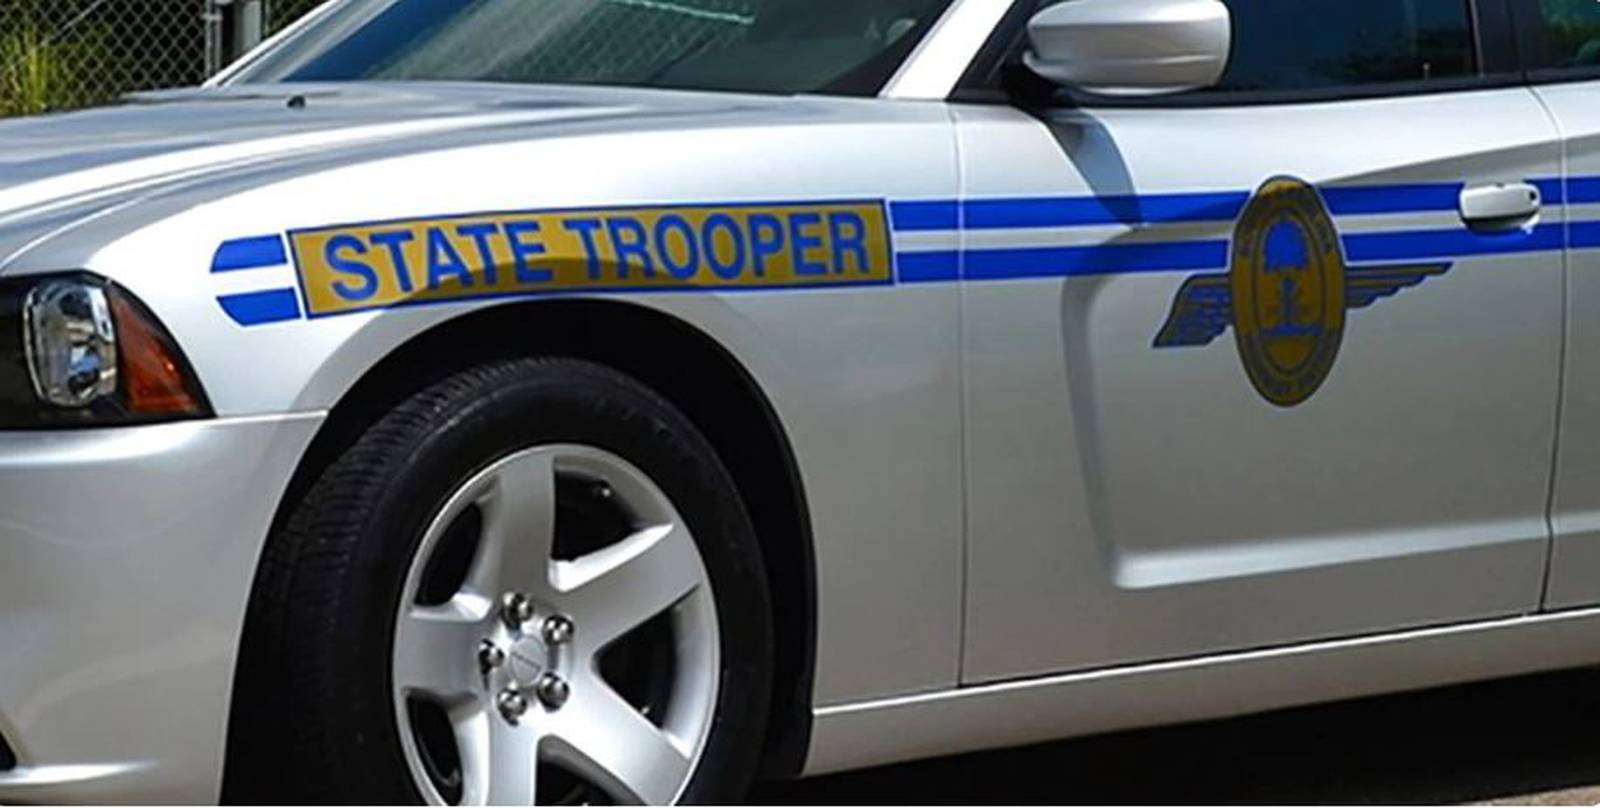 Woman Killed Another Hurt In Motorcycle Crash In York County Troopers